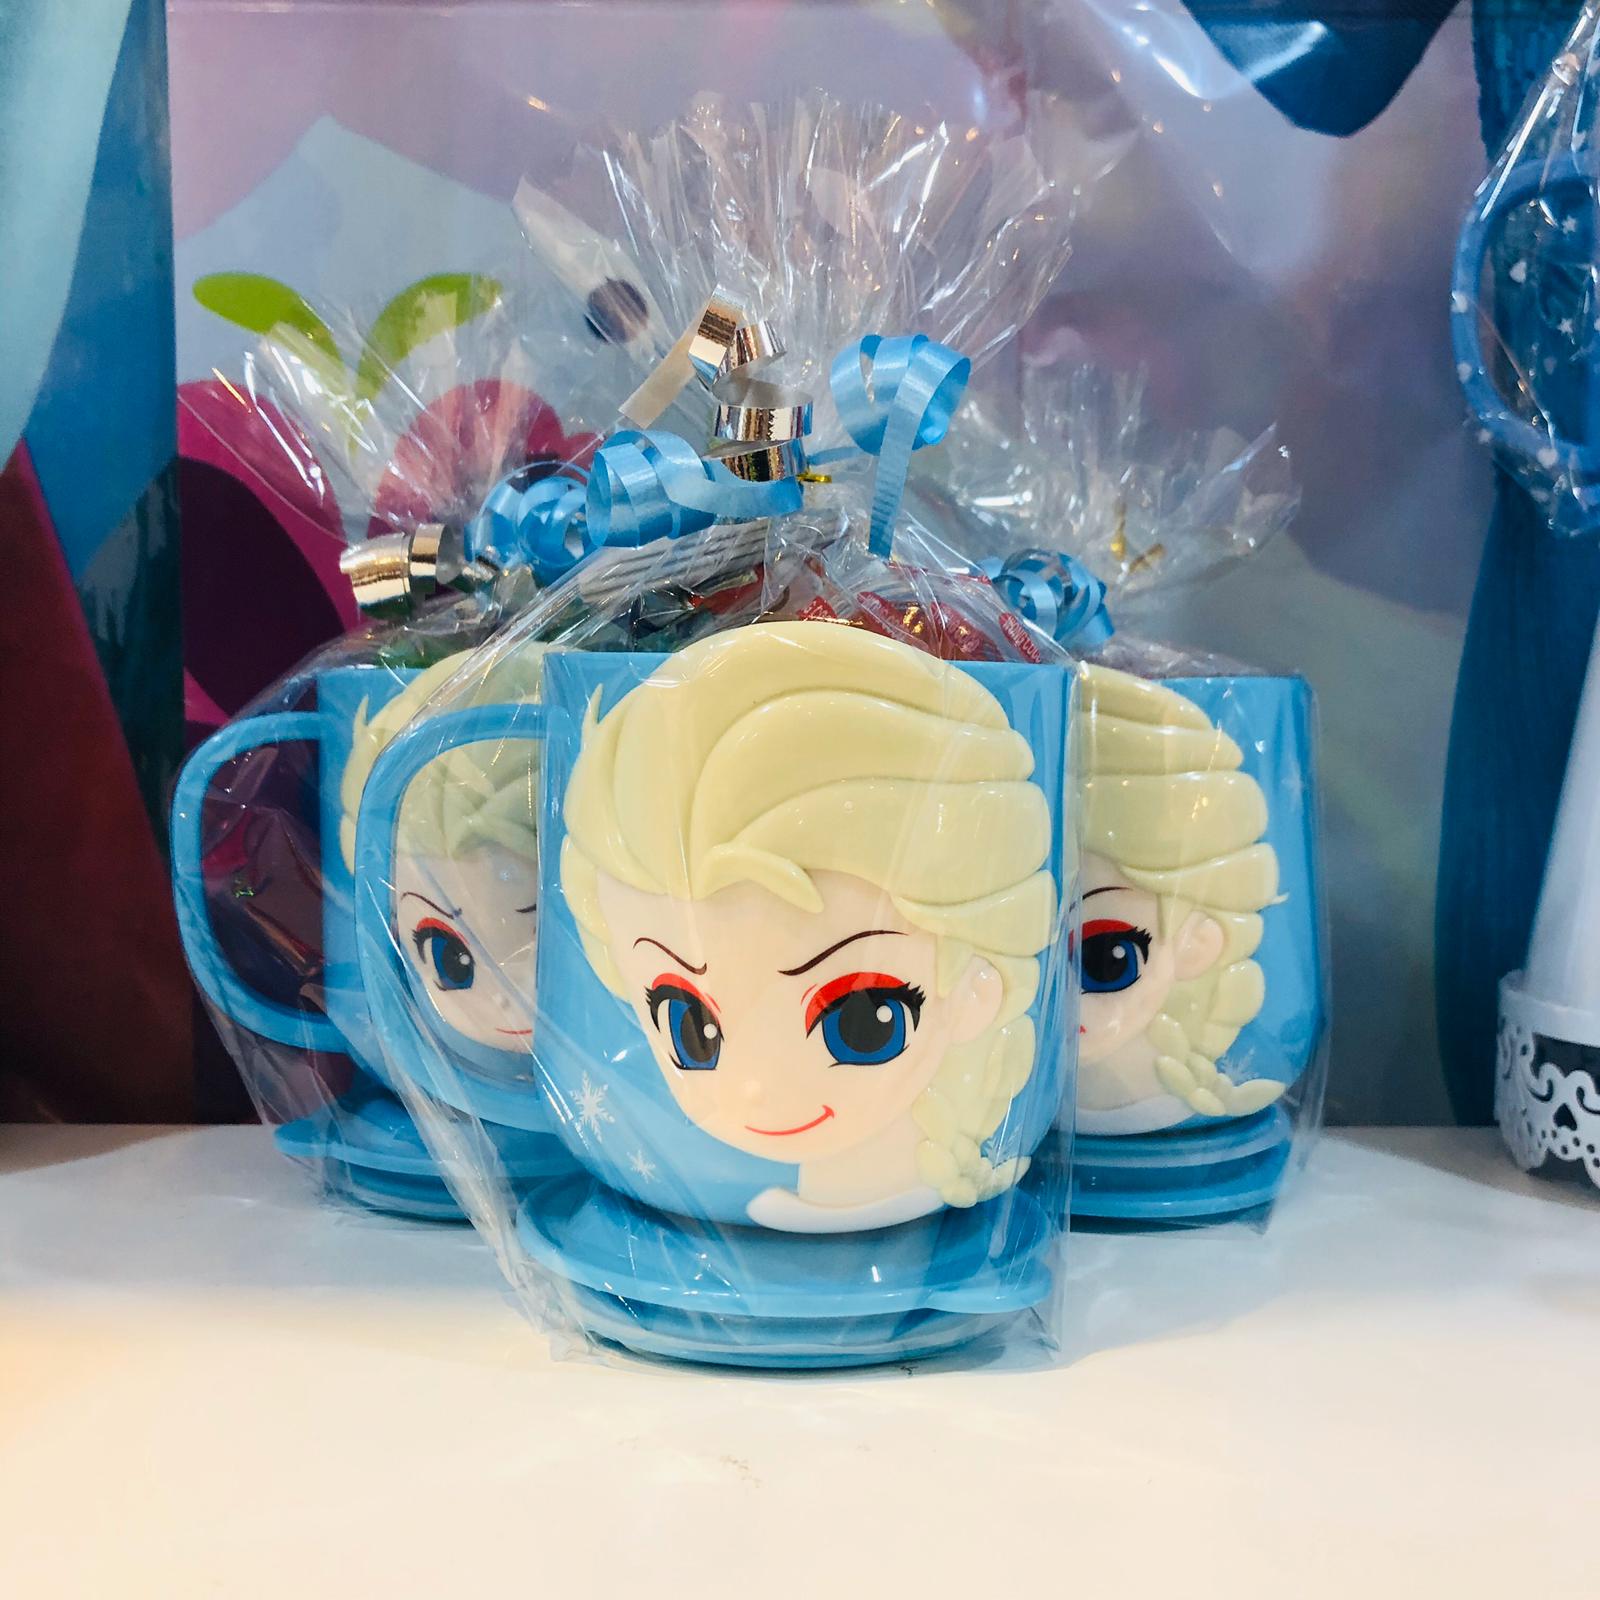 Disney Frozen Party Favors for Boys - Two Sisters